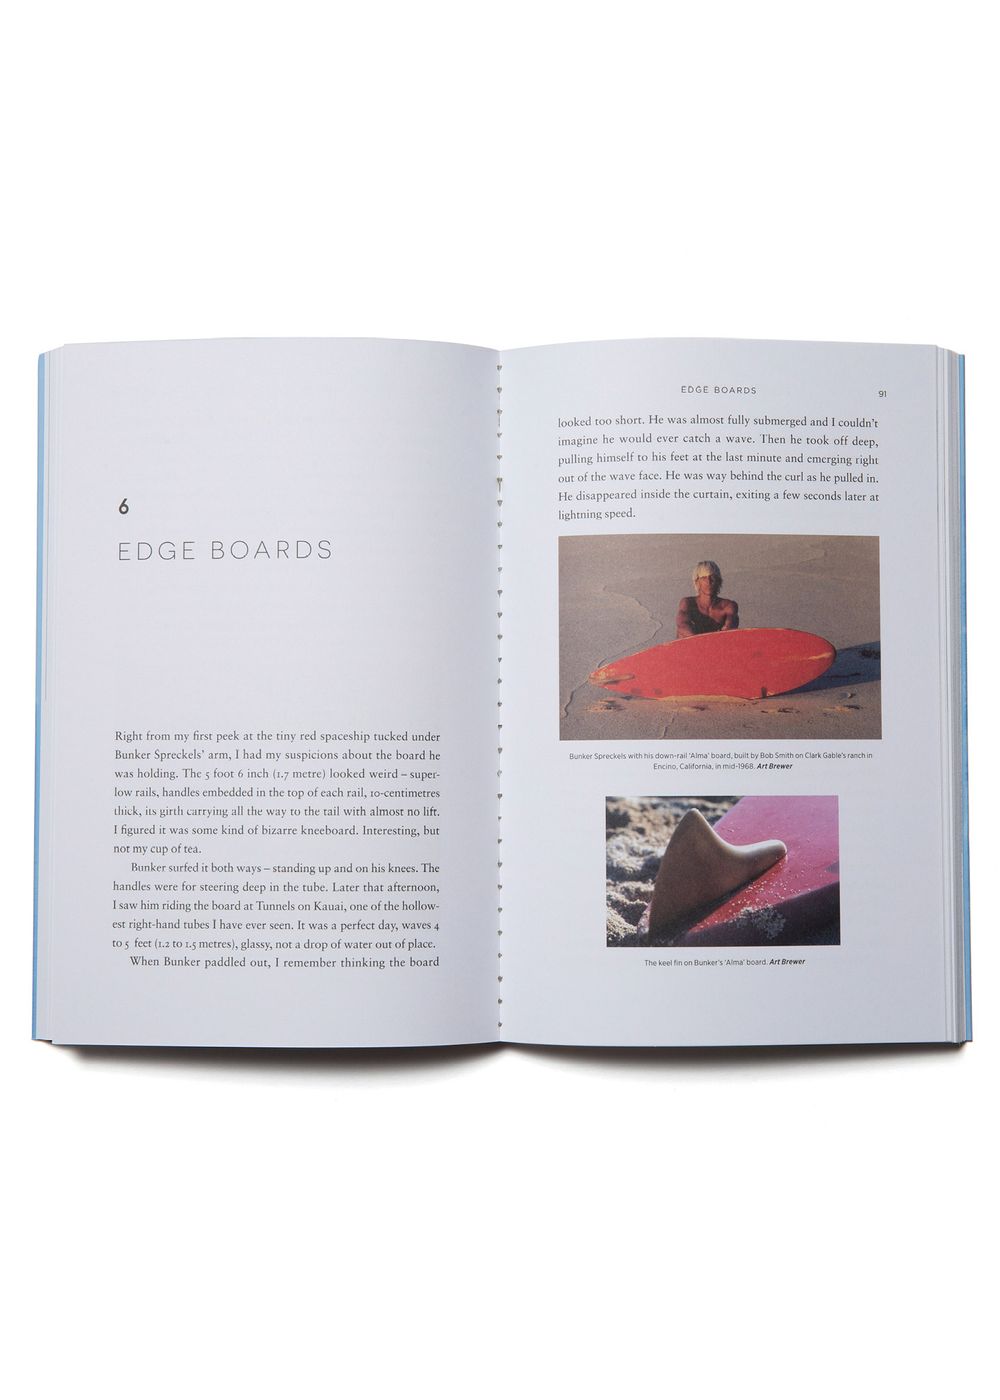 An open book with white pages including black lettering and two images of surfboards